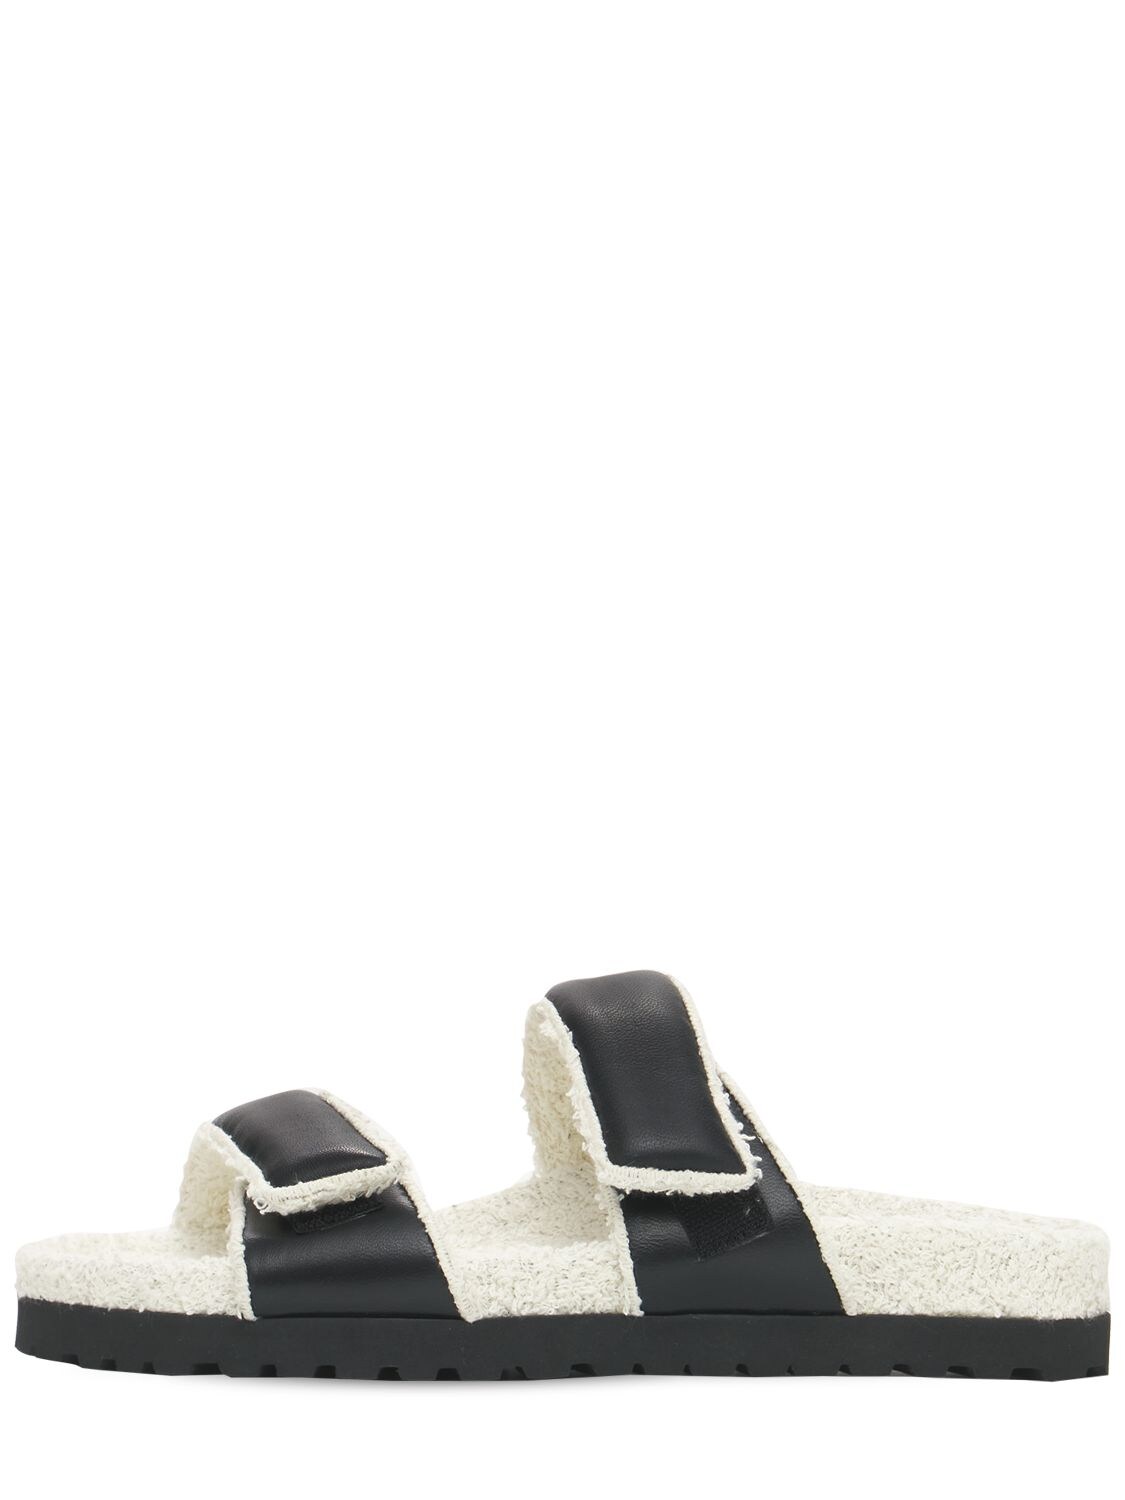 GIA X PERNILLE TEISBAEK 20mm Leather & Terry Cloth Sandals